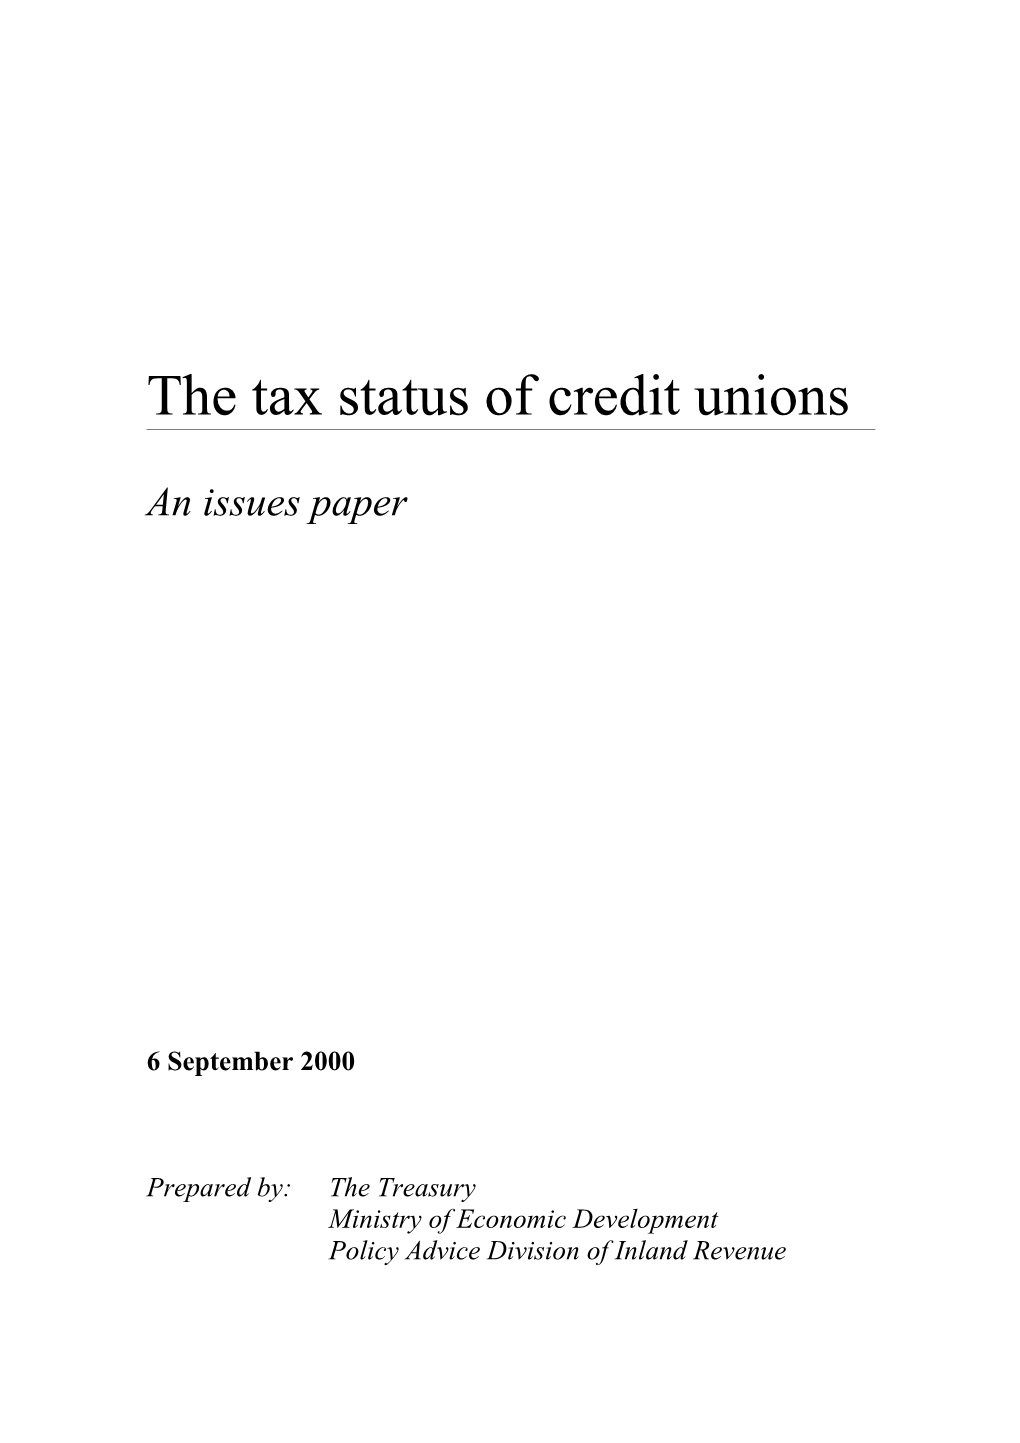 The Tax Status of Credit Unions